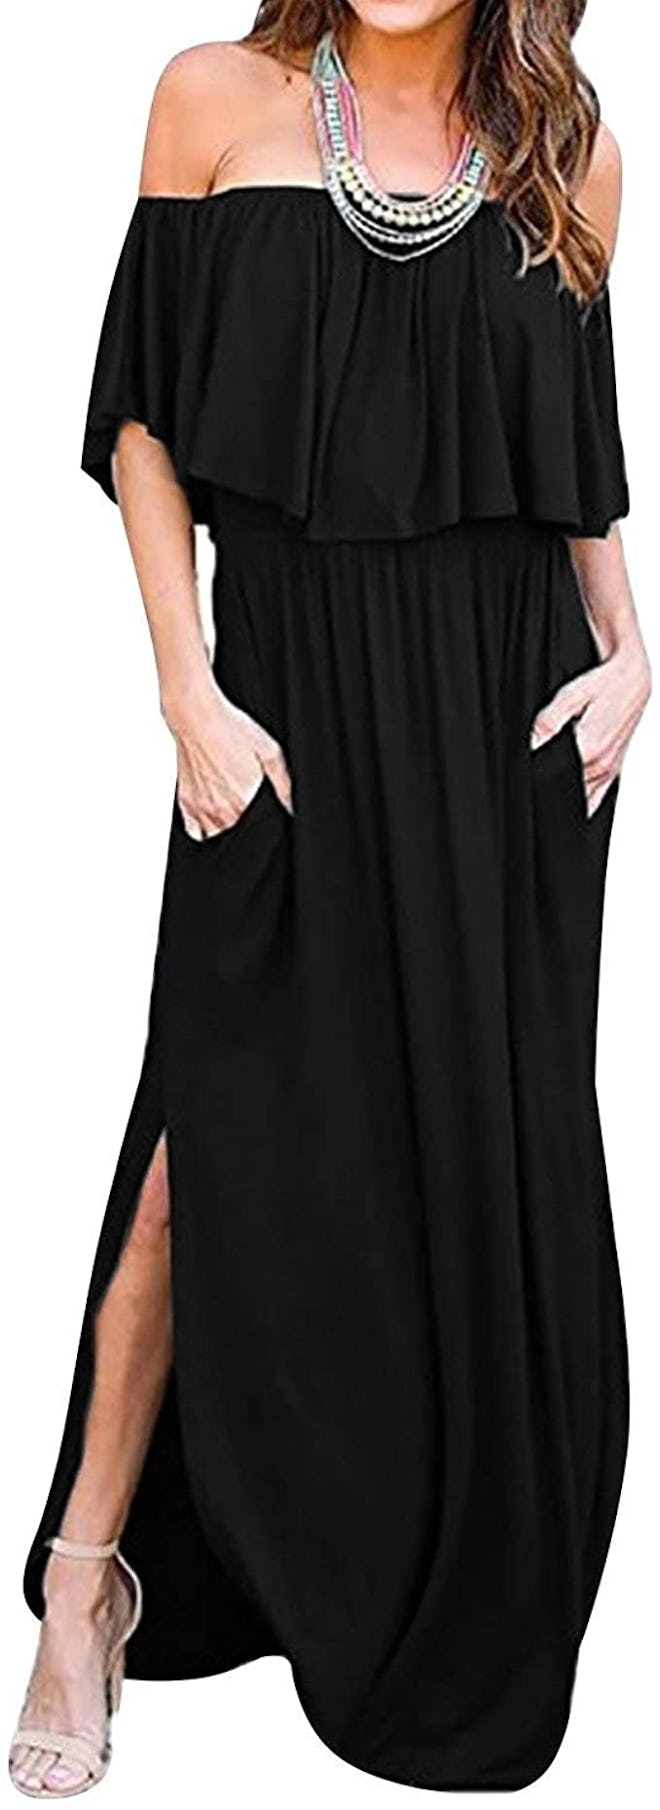 LILBETTER Off-The-Shoulder Ruffle Dress